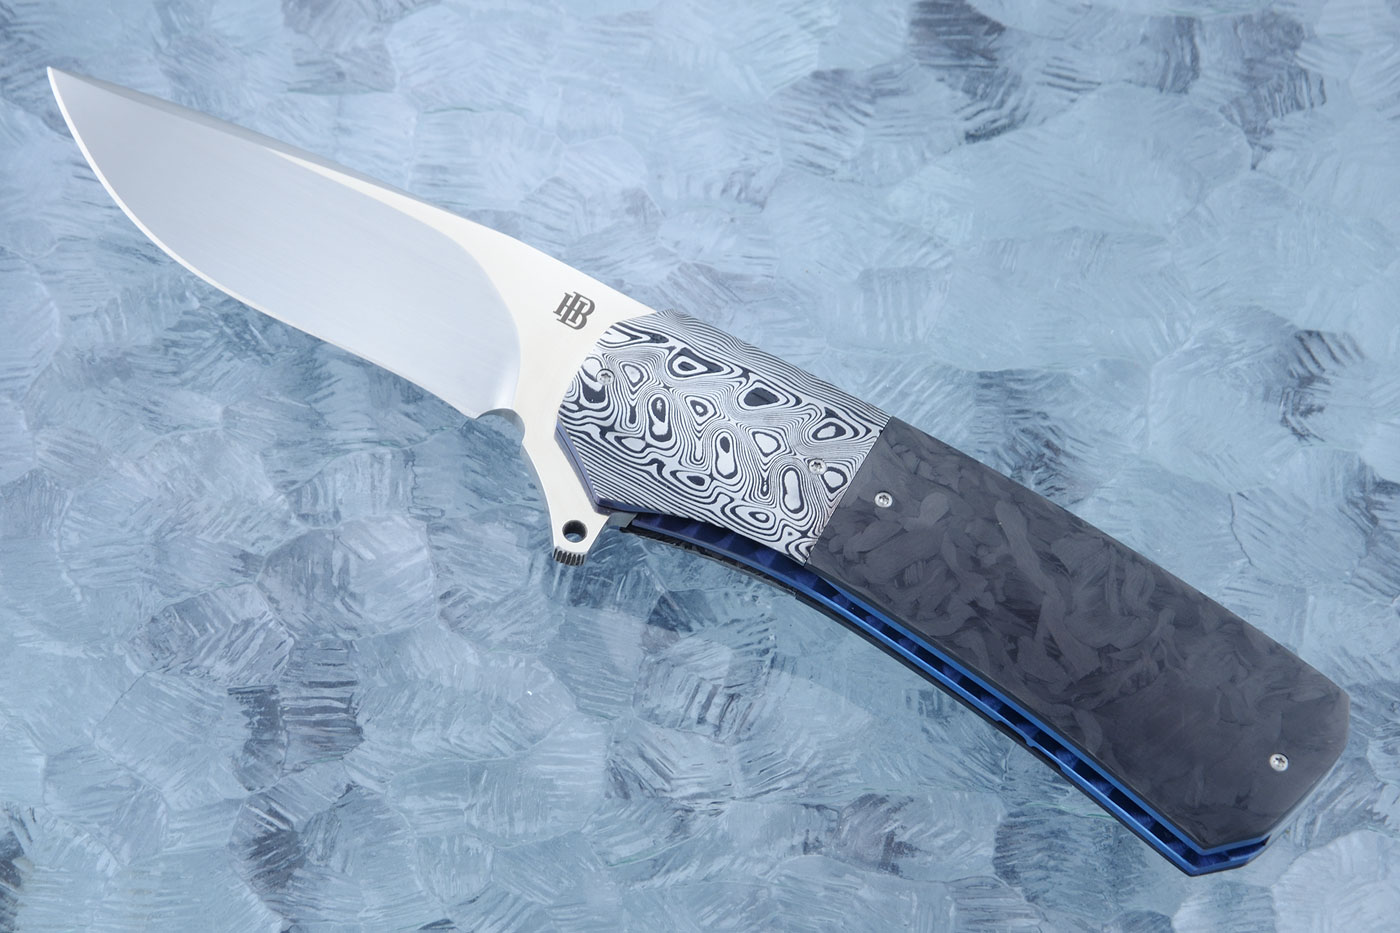 HB15 Flipper with Damasteel and Marble Carbon Fiber (Ceramic IKBS) - M390